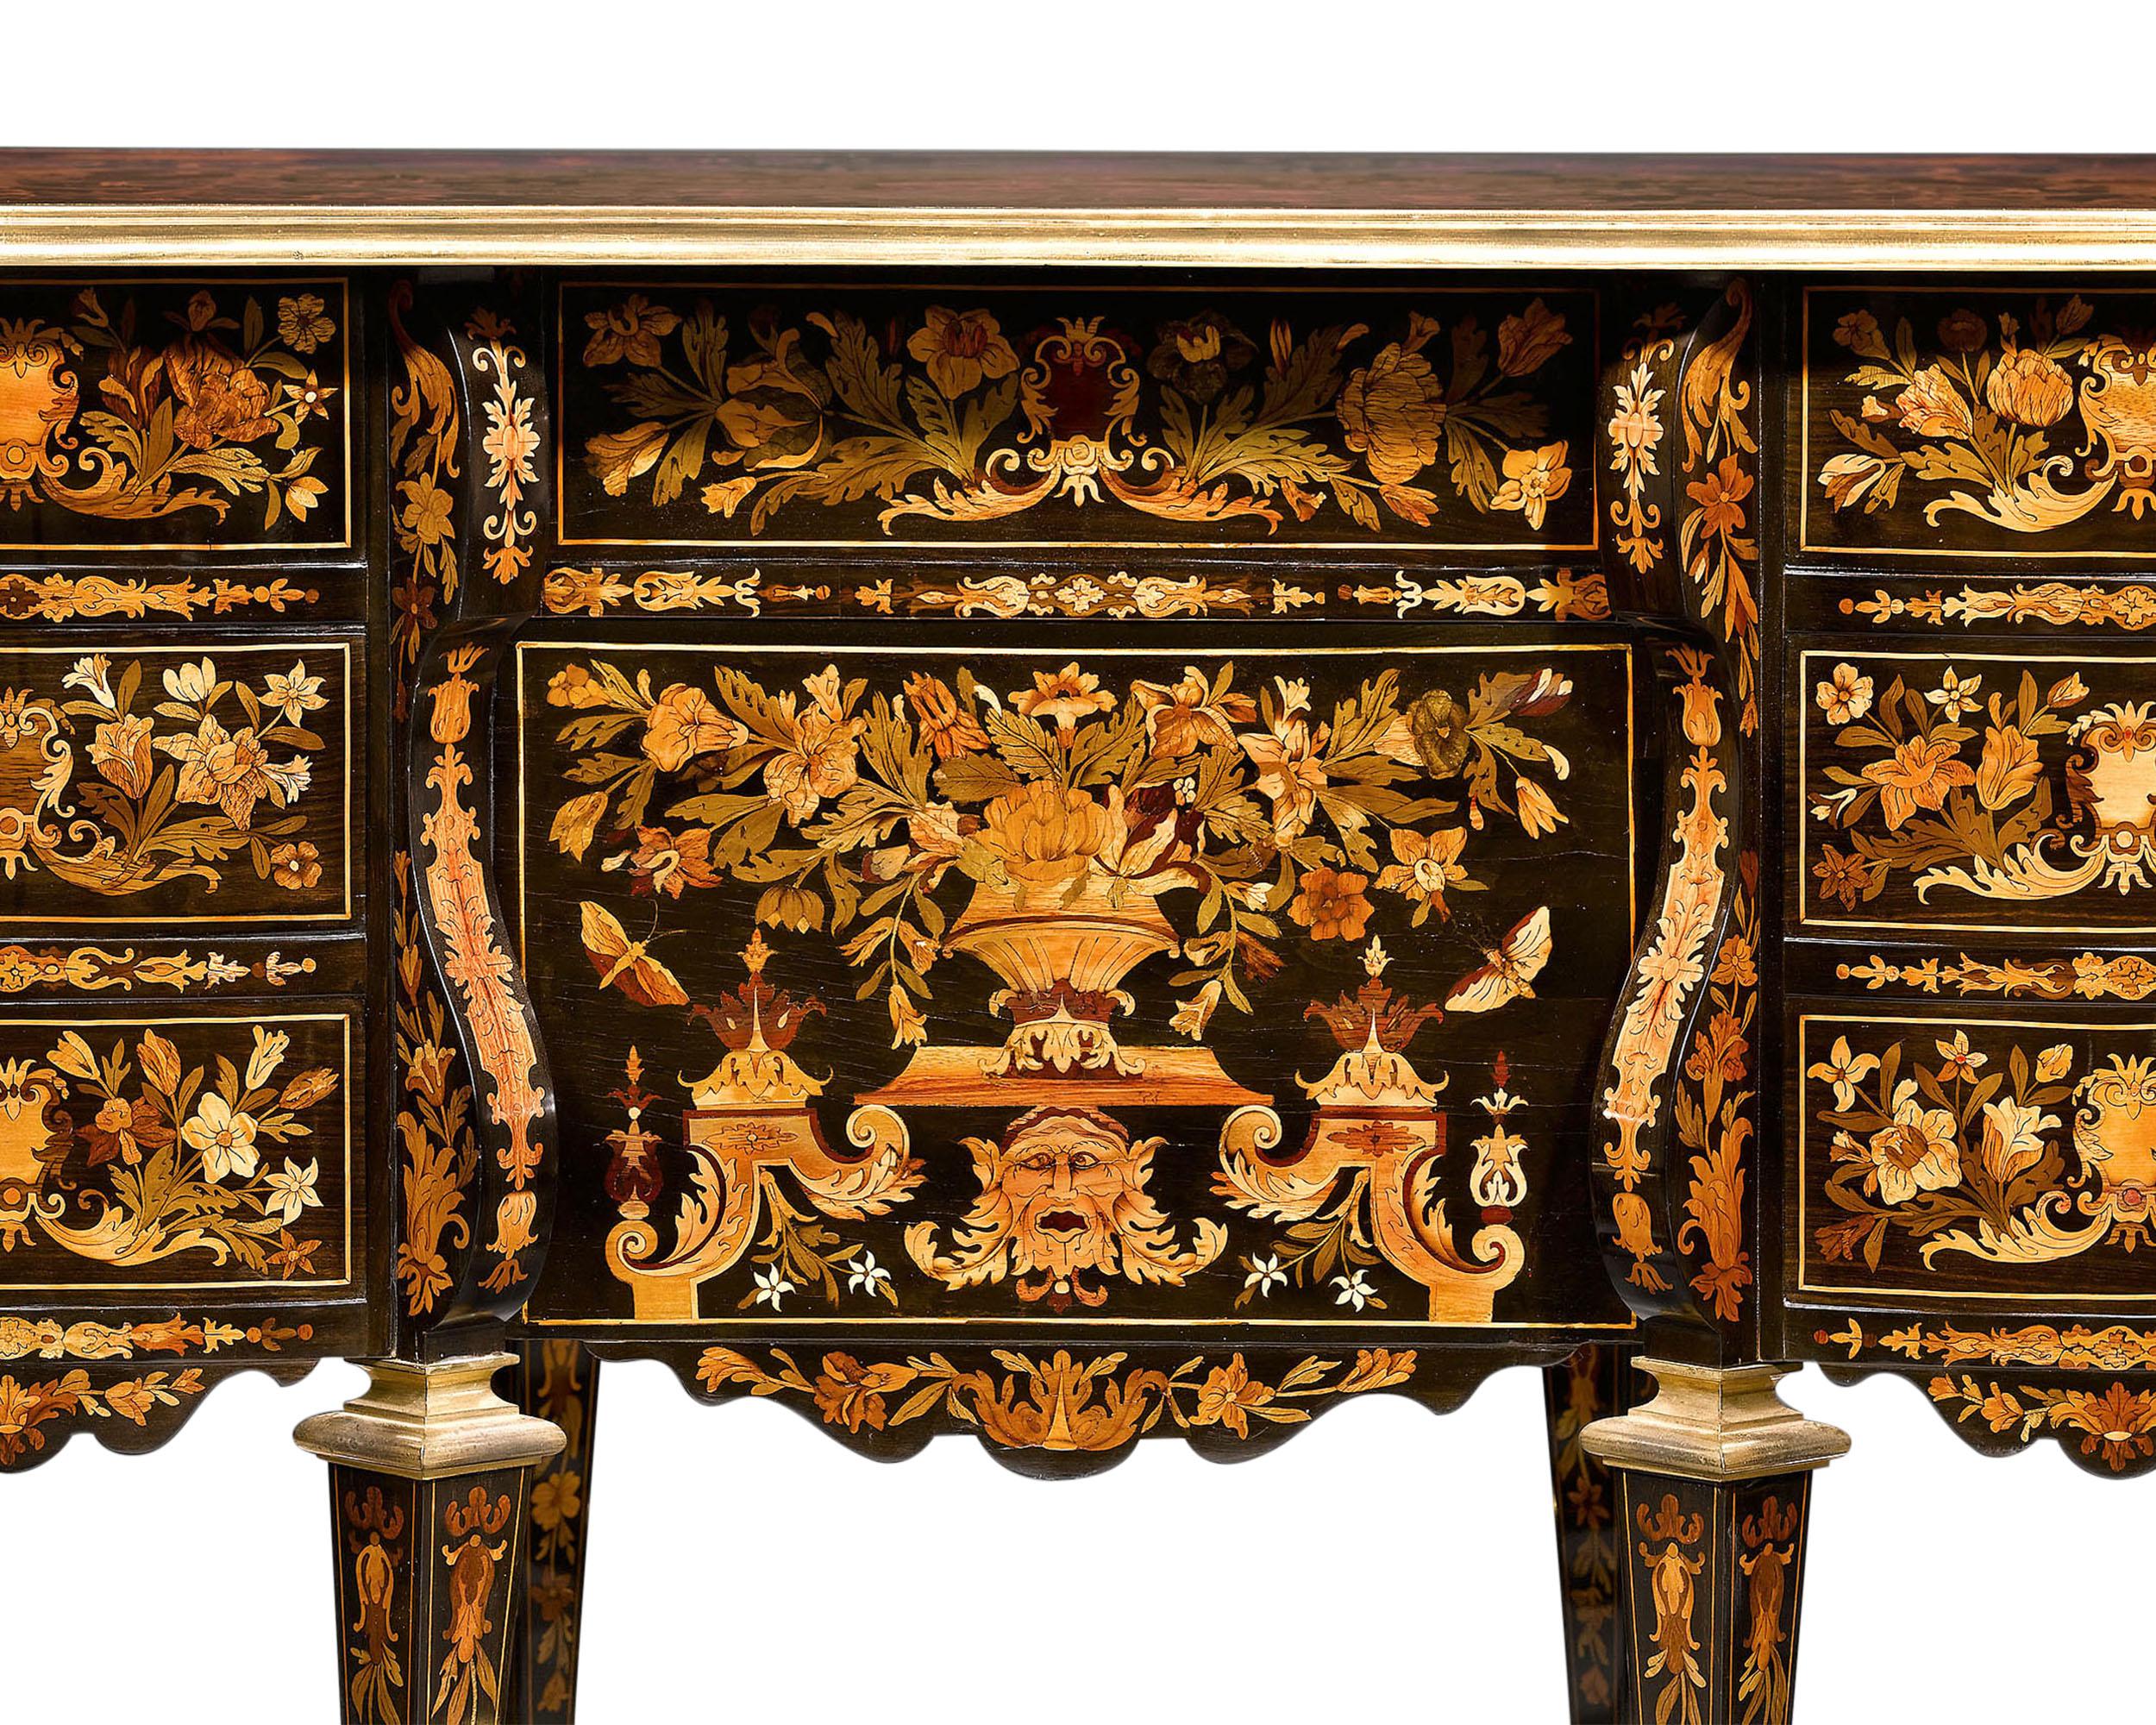 Louis XIV Rothschild Desk Attributed to Pierre Golle